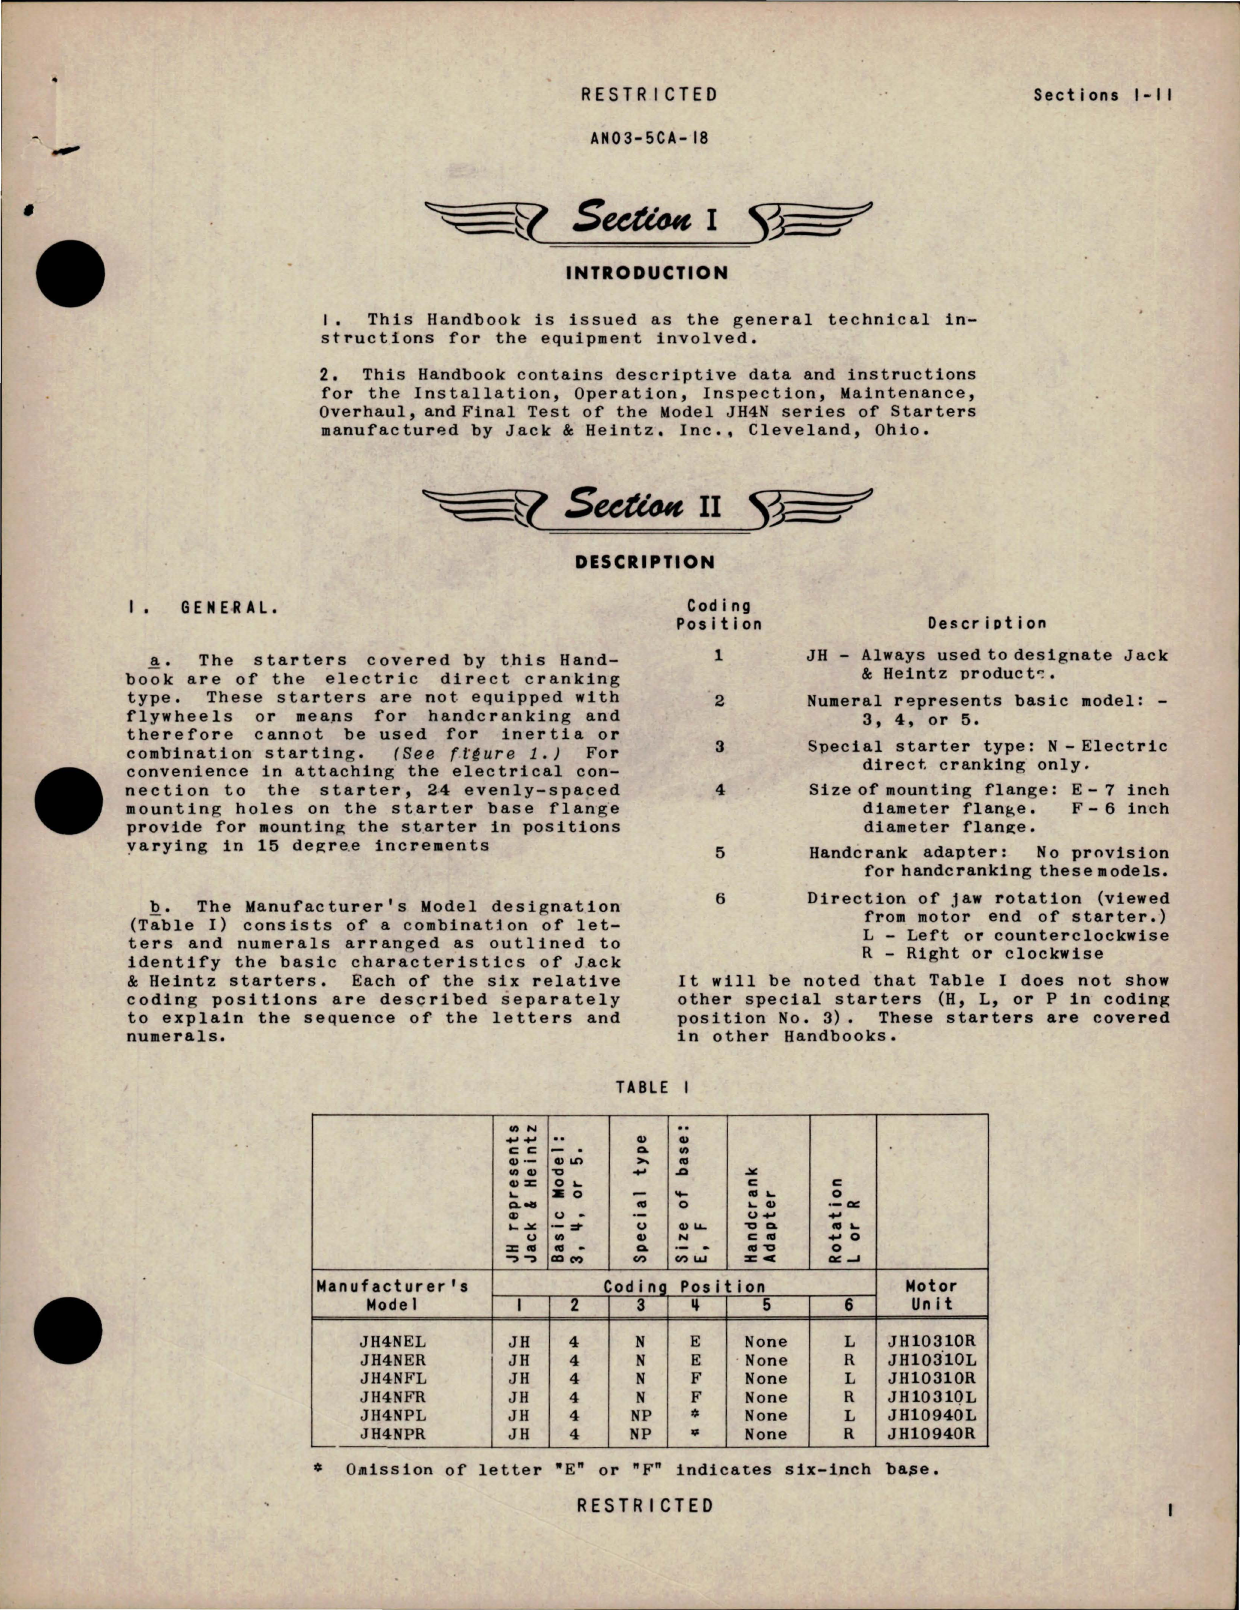 Sample page 5 from AirCorps Library document: Handbook of Instructions with Parts Catalog for Starter - Models JH4NER, JH4NFL, JH4NEL, JH4NPR, JH4NFR, and JH4NPL